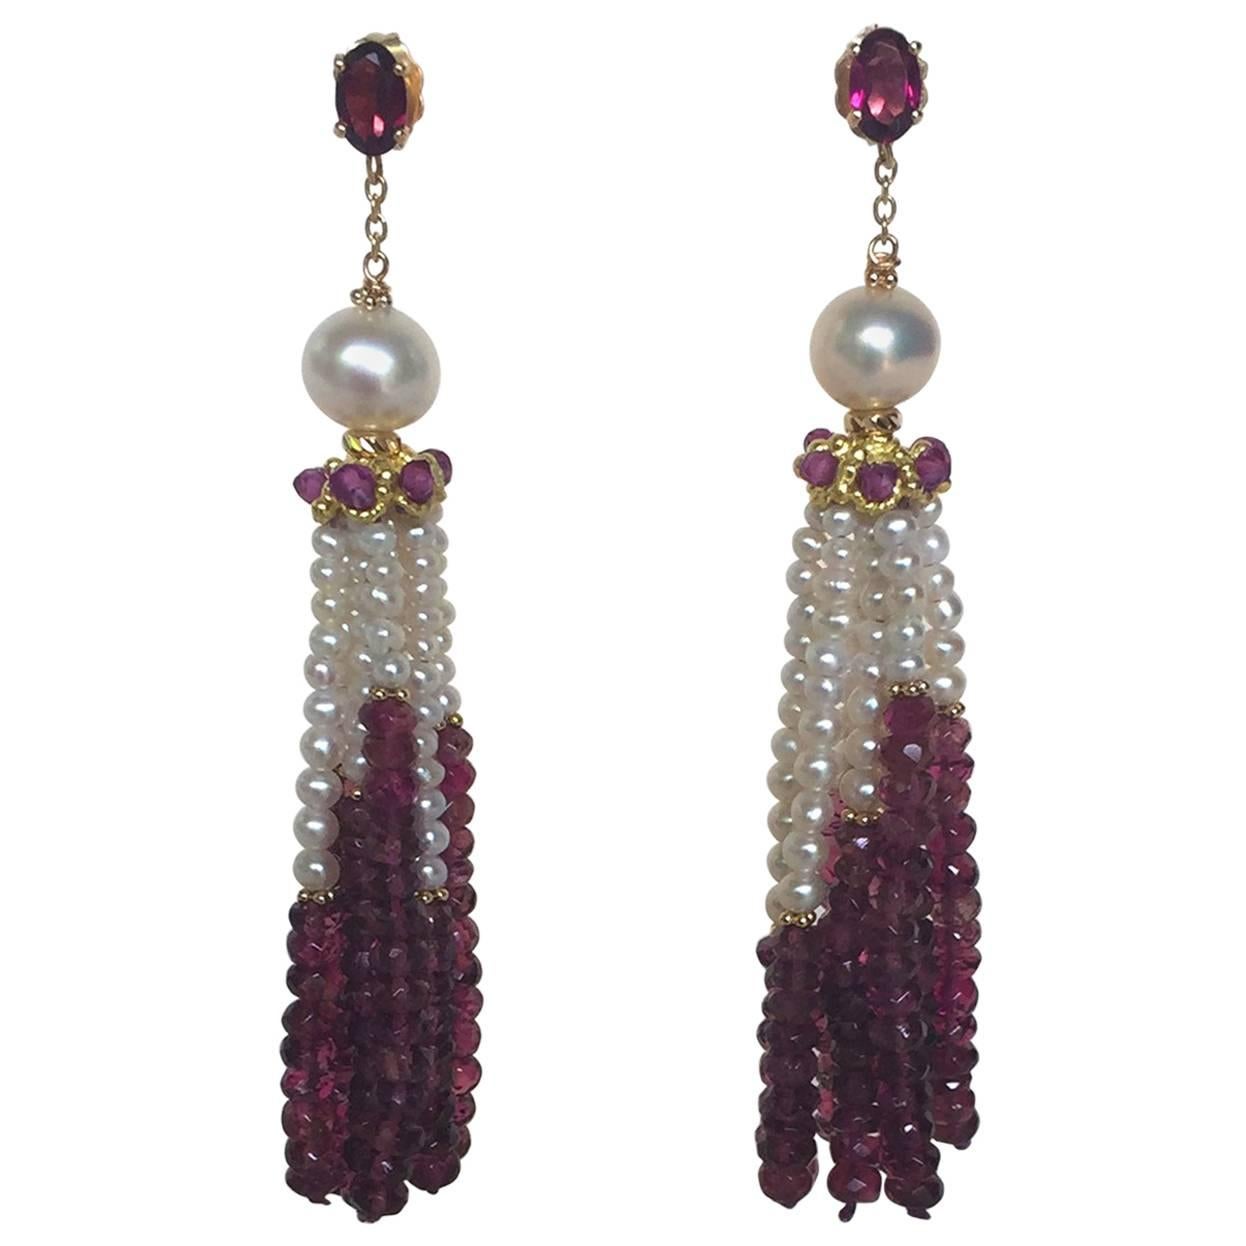 Graduated Pearl and Garnet Tassel Earrings with 14k Gold by Marina J 